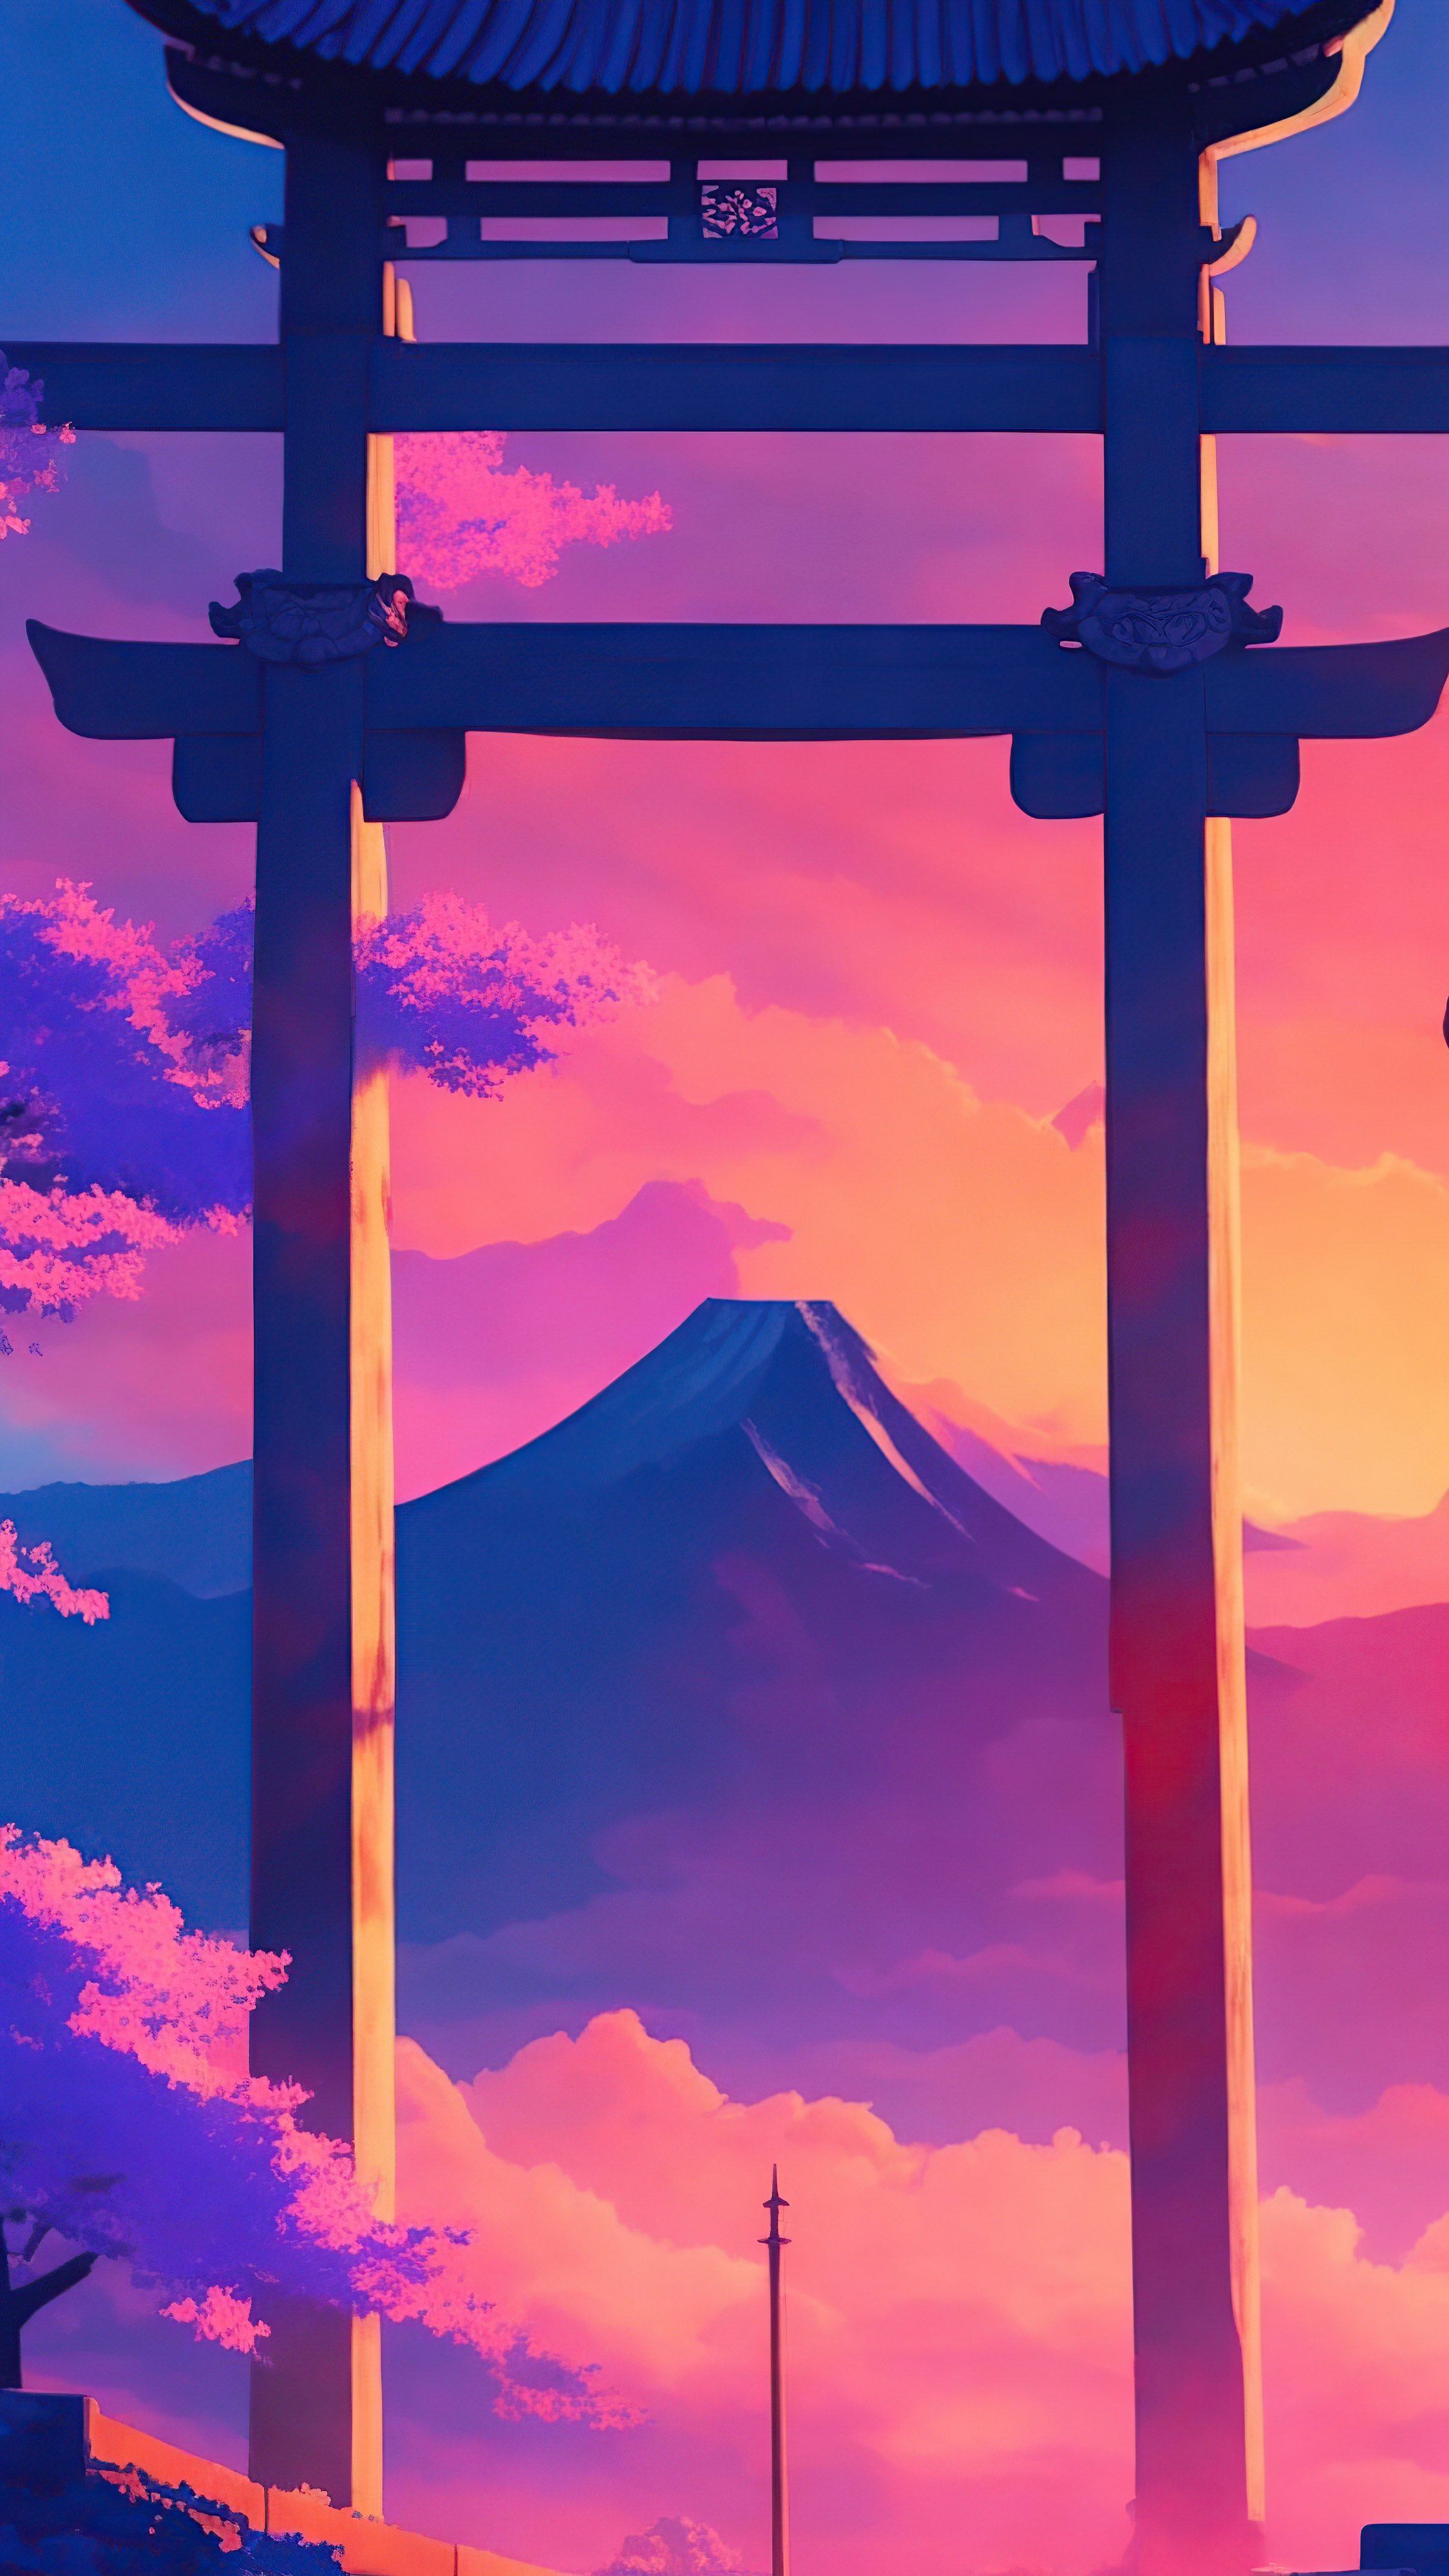 Adorn your lock screen with our iPhone lock screen wallpaper in 4K, unfolding a serene and mystical landscape with a traditional Asian-style building and a Torii gate silhouetted against the sky’s vibrant hues, while the sun’s warm glow softly illuminates the clouds and mountains in the background.